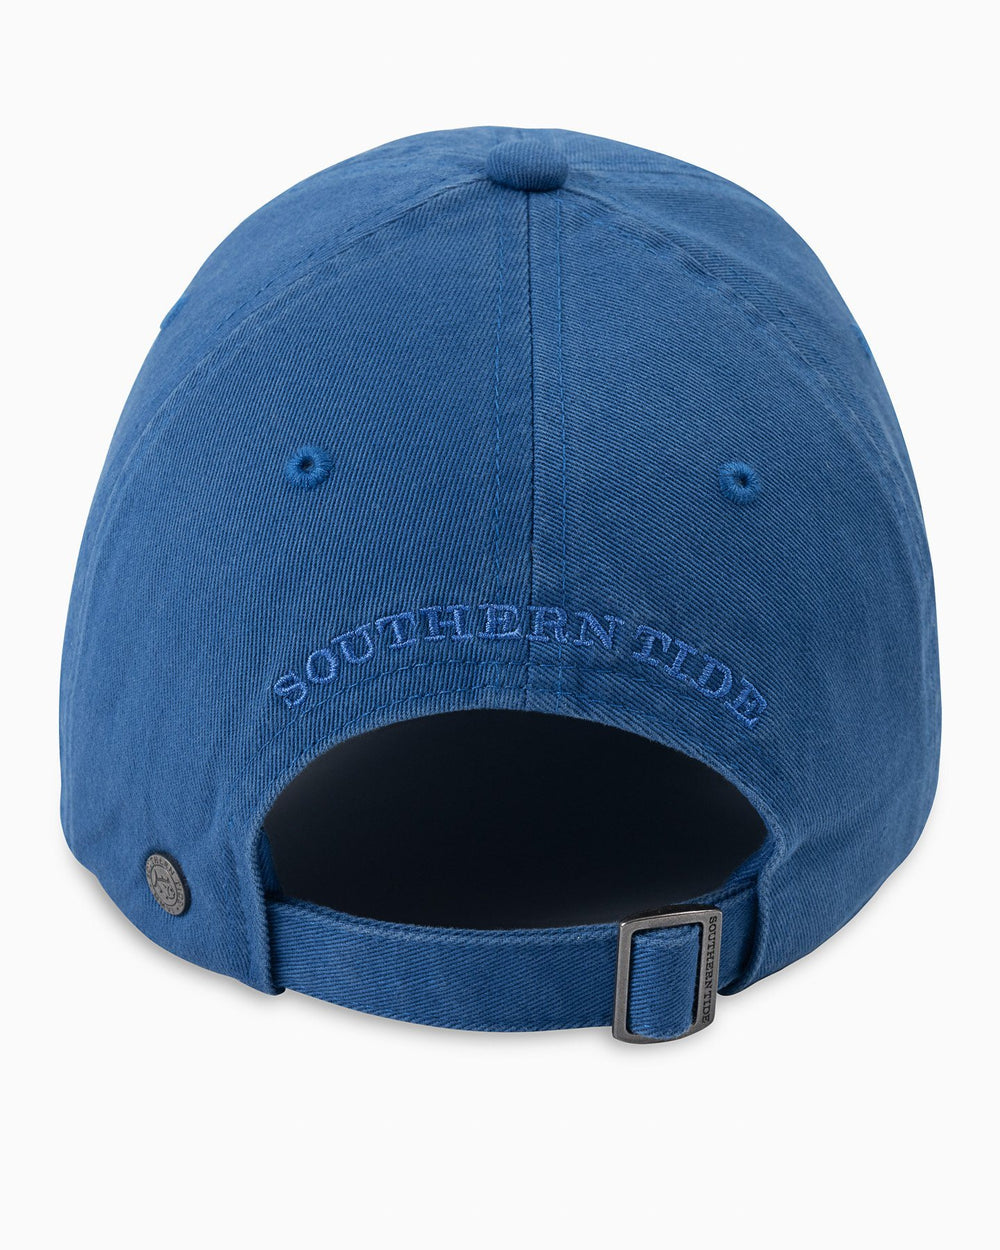 The back of the Skipjack Hat by Southern Tide - Boat Blue